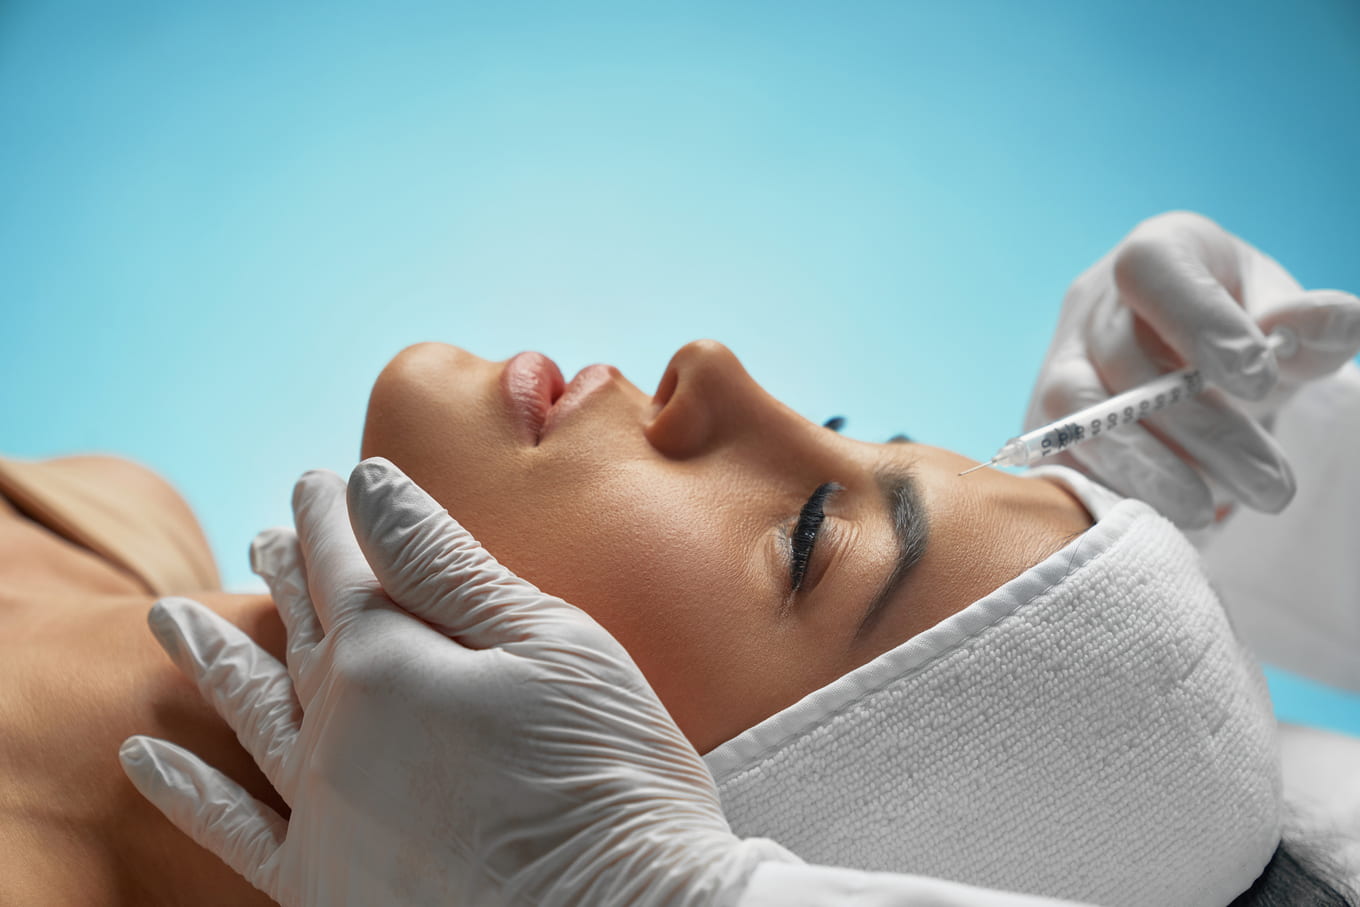 cosmetic botox injection in female forehead